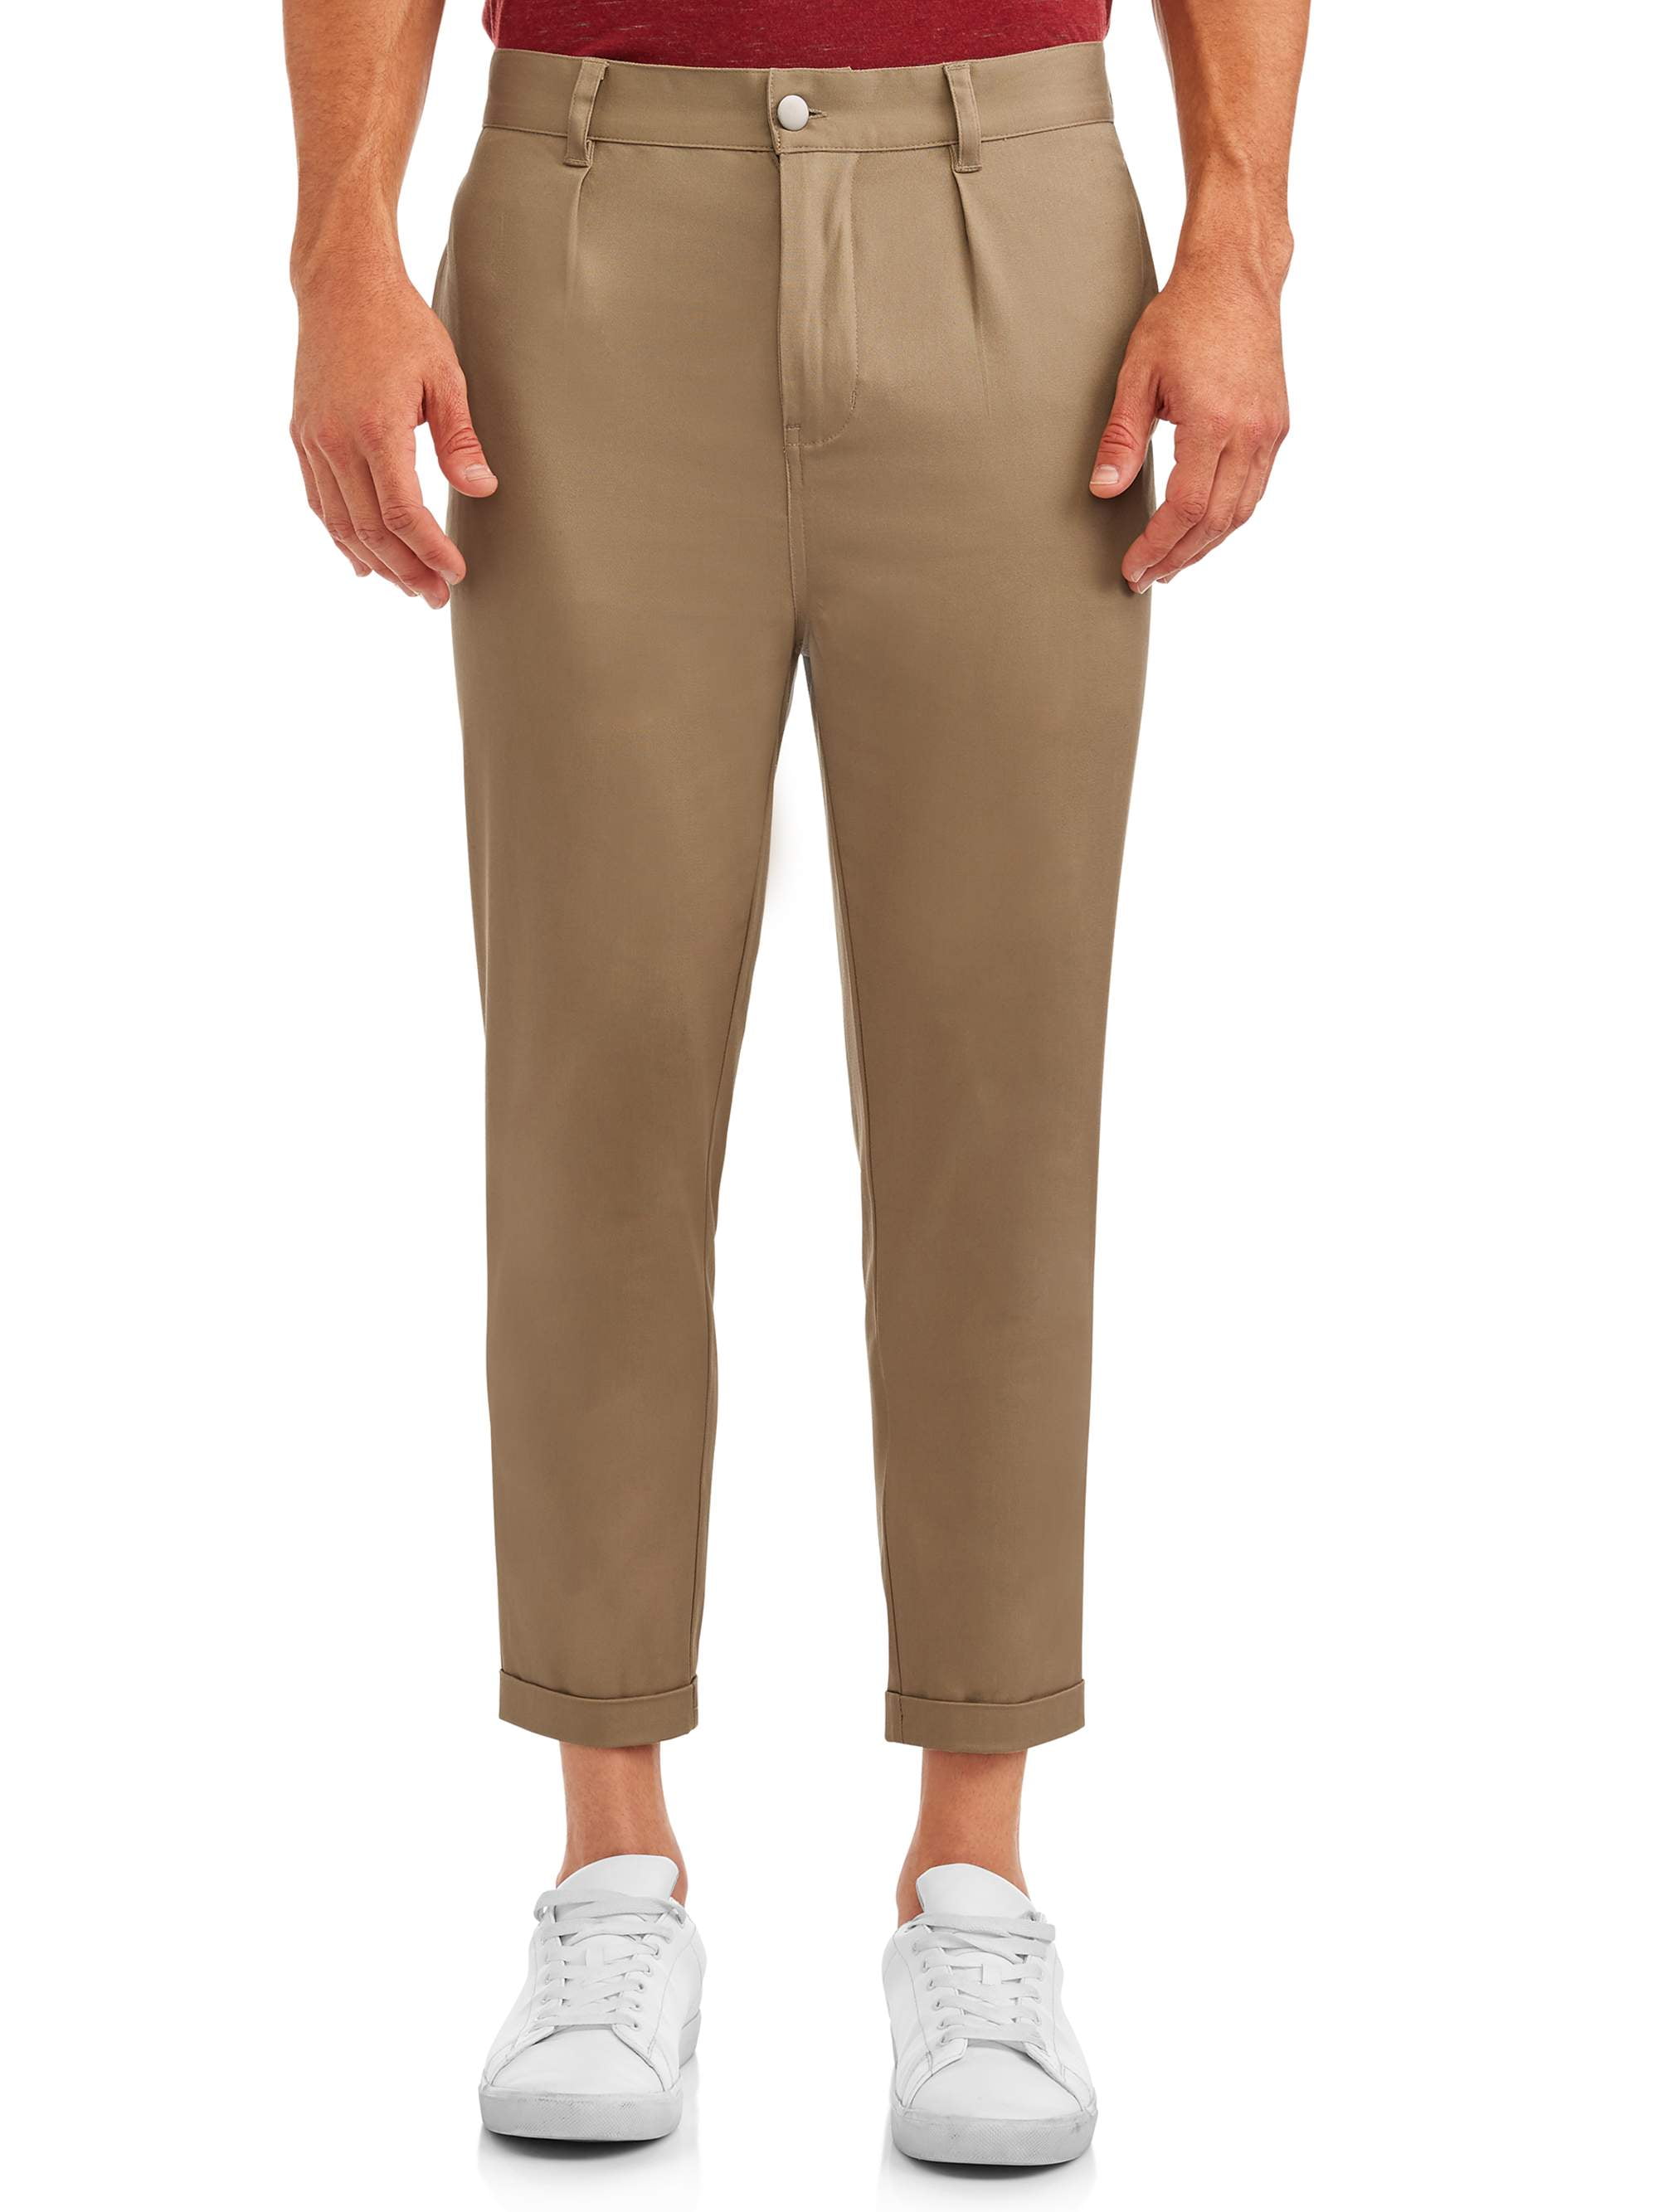 Kenzo Tapered Cropped Fit Stretch Cotton Chino Pants men - Glamood Outlet